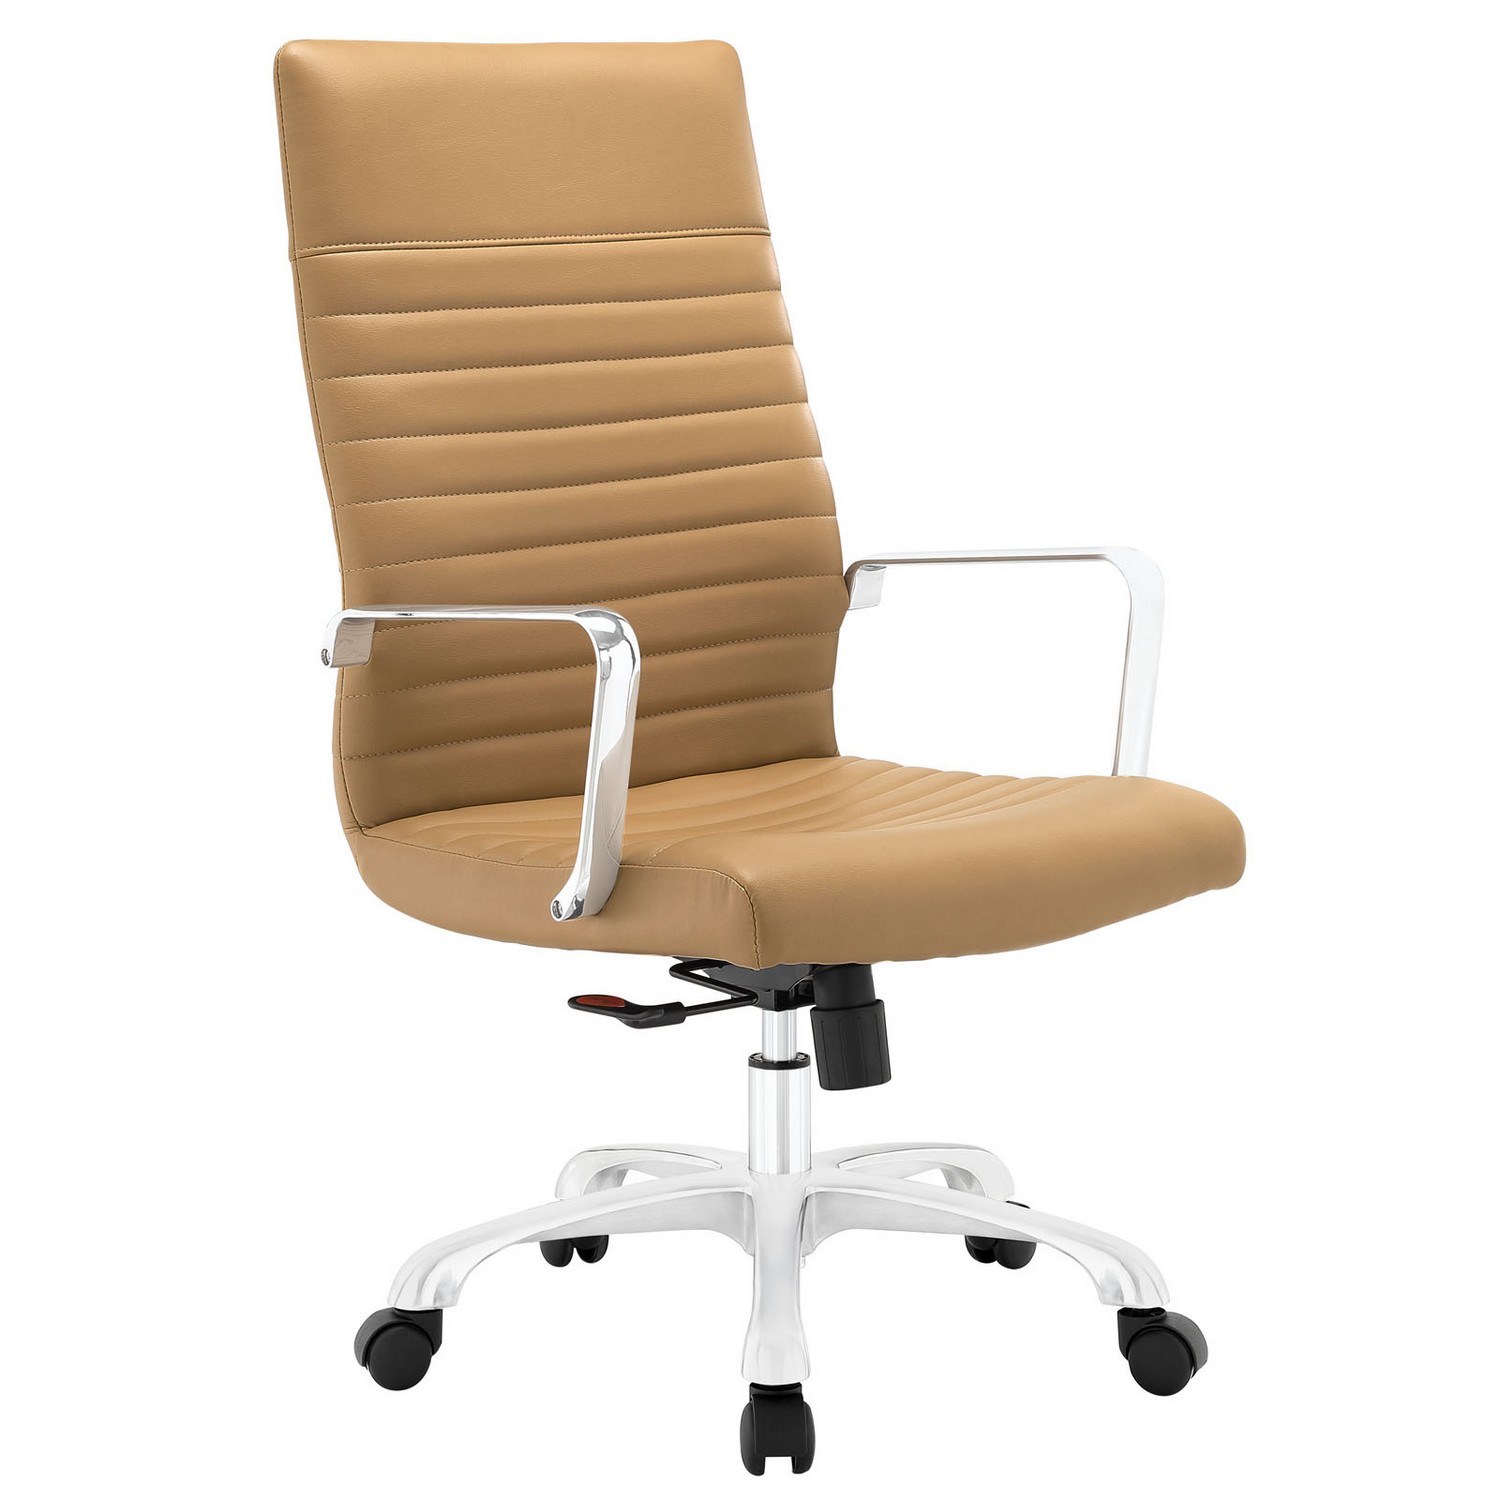 Modway Finesse Highback Office Chair - Tan